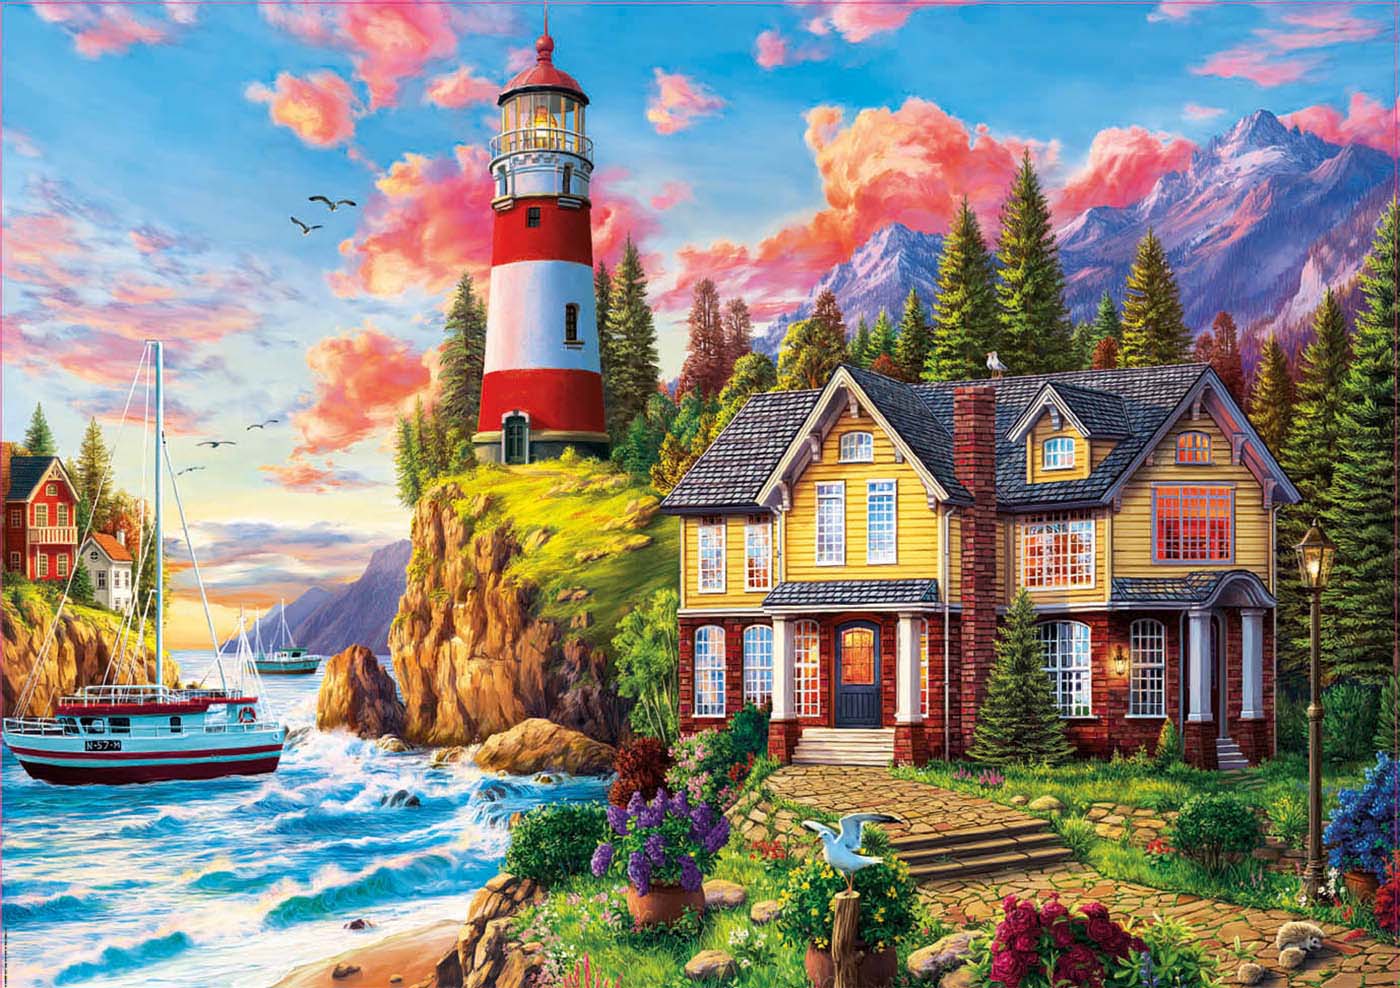 Lighthouse Near The Ocean - Scratch and Dent Lighthouse Jigsaw Puzzle